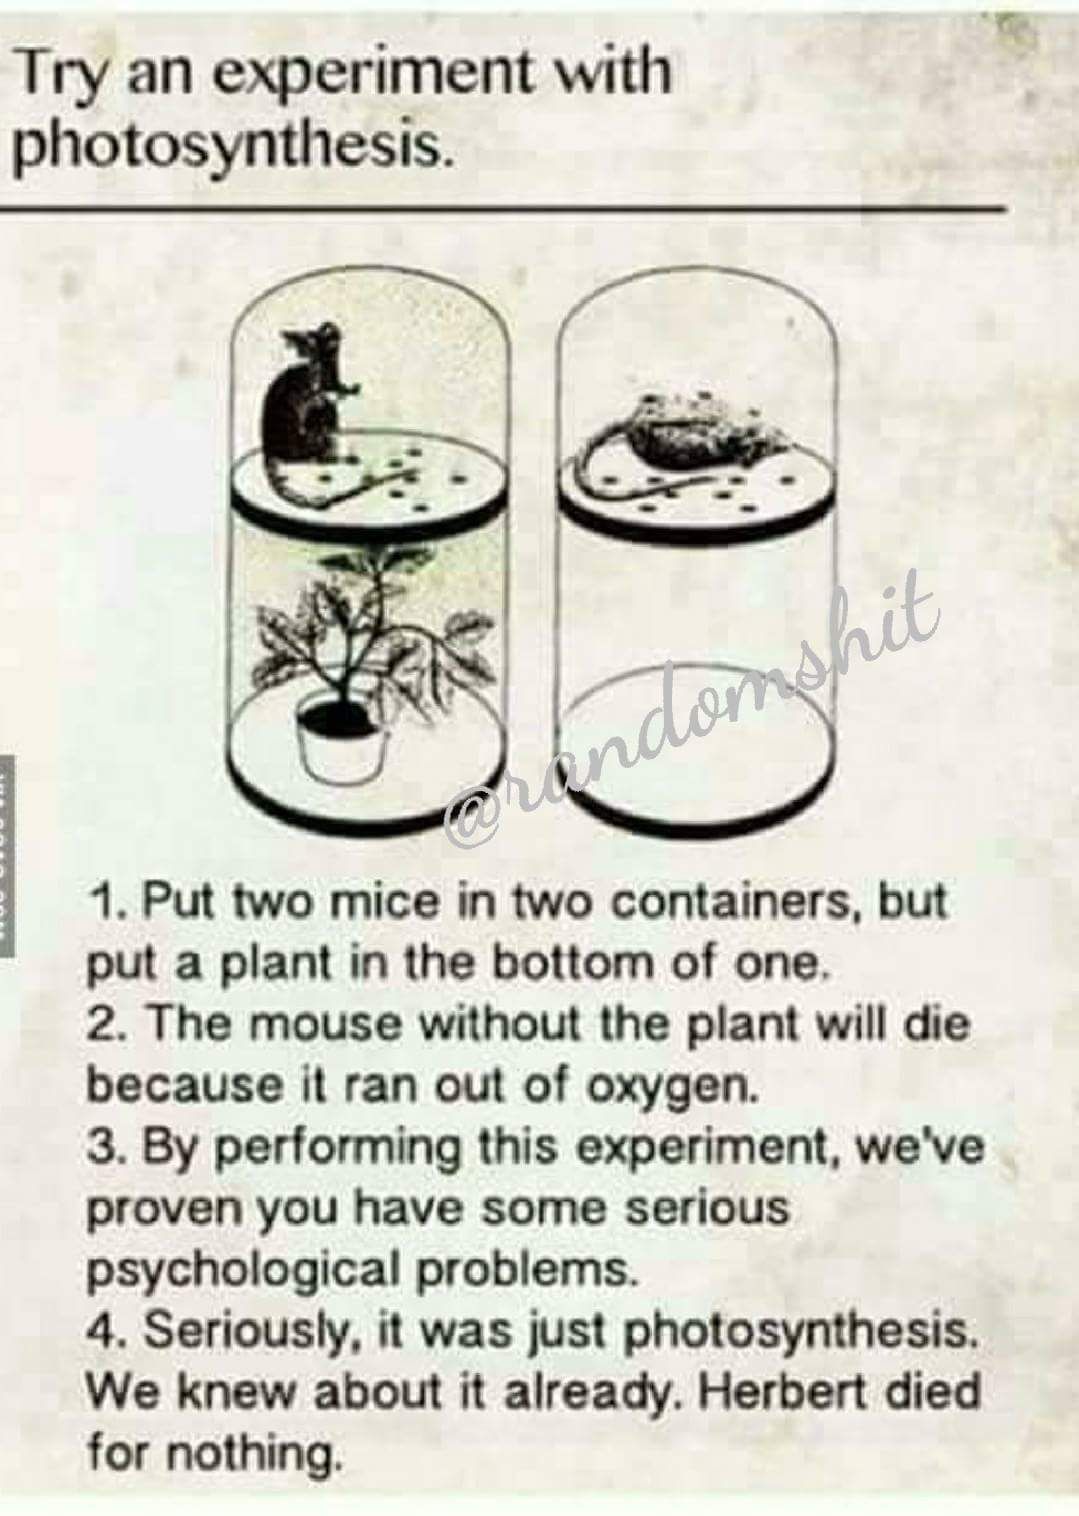 amazing picture of photosynthesis experiment meme - Try an experiment with photosynthesis. 1. Put two mice in two containers, but put a plant in the bottom of one. 2. The mouse without the plant will die because it ran out of oxygen. 3. By performing this